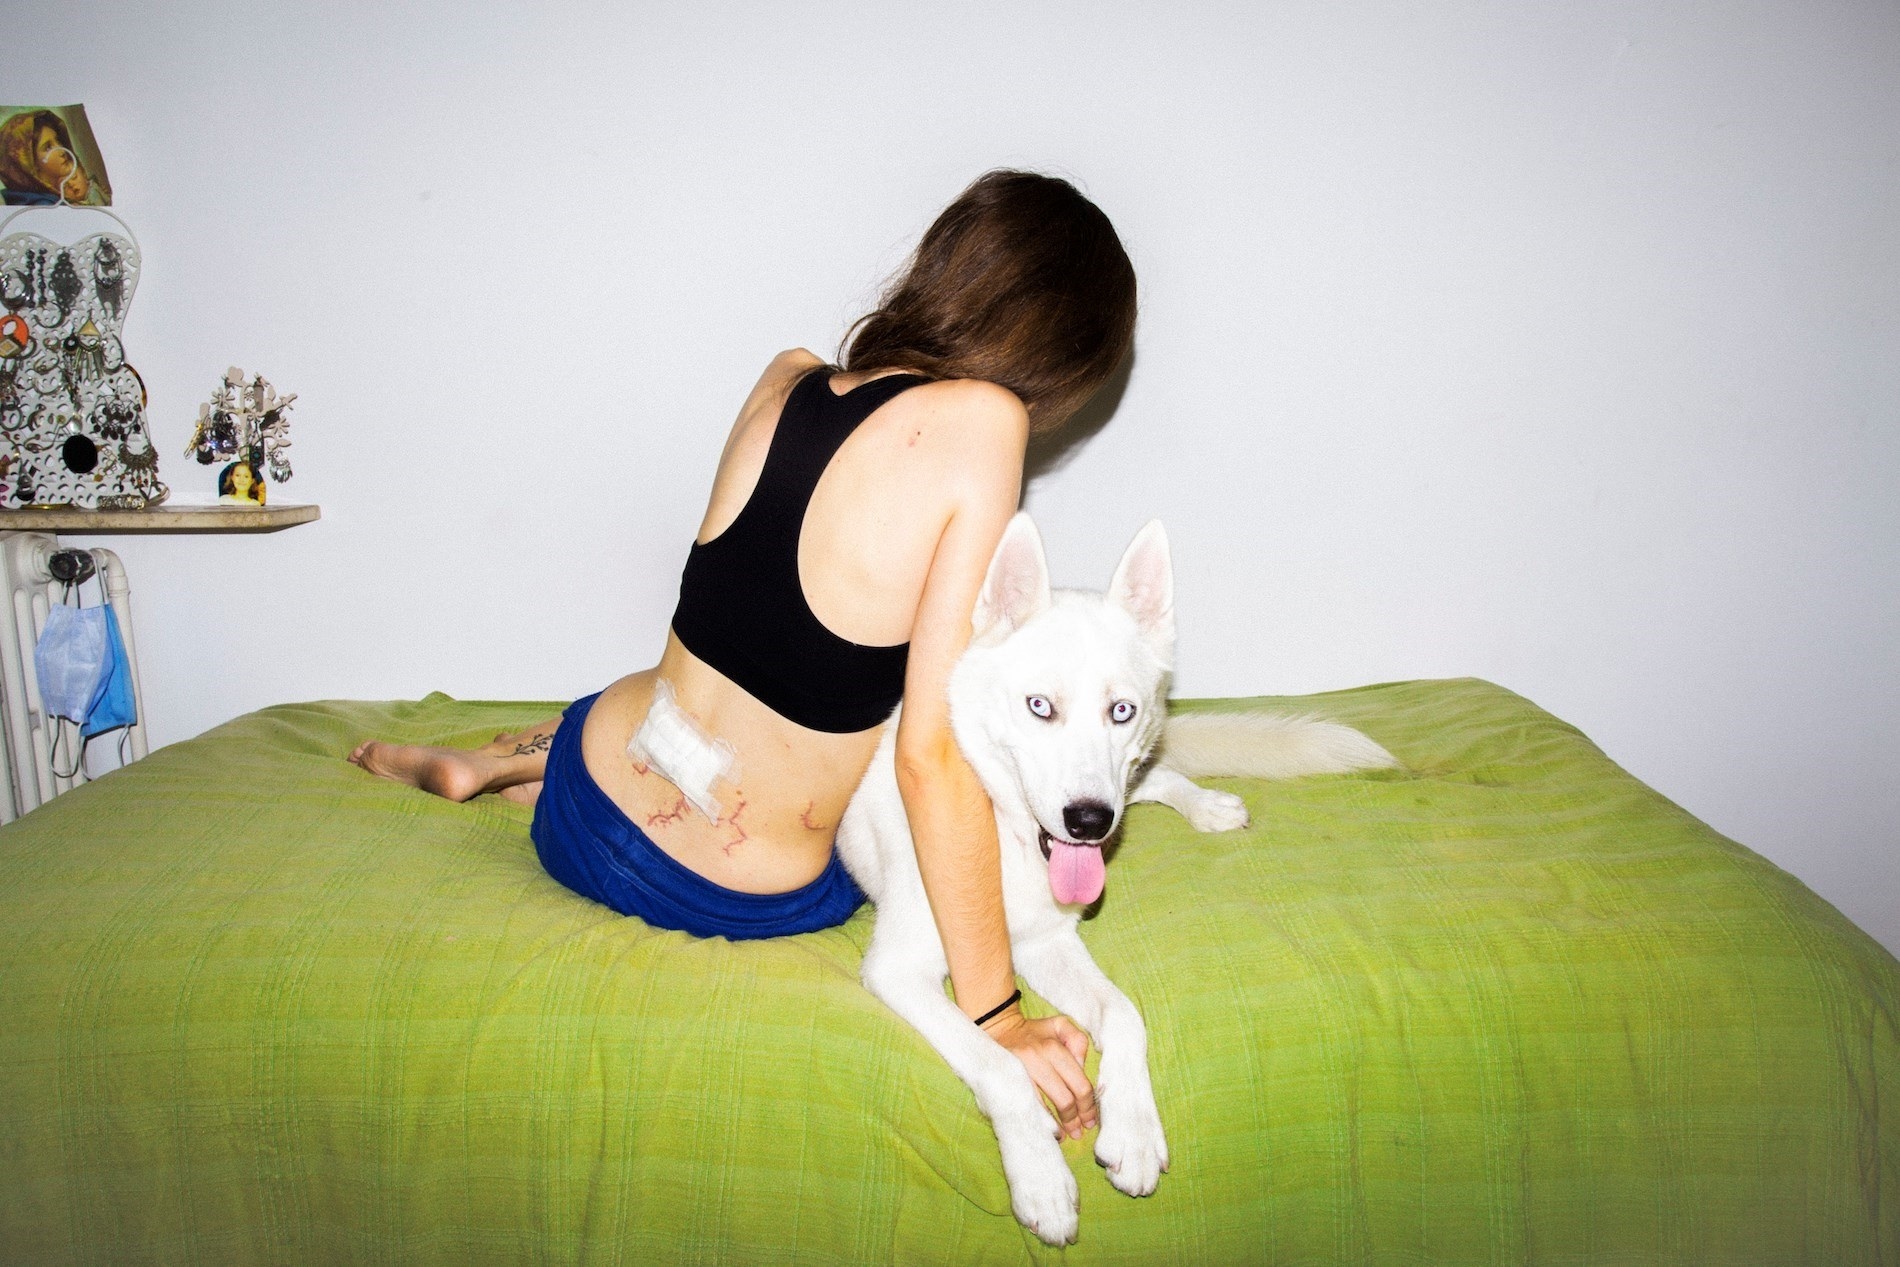 A woman sits with her dog on a bed; she is turned away from the camera and shows injuries and a bandage on her bare back